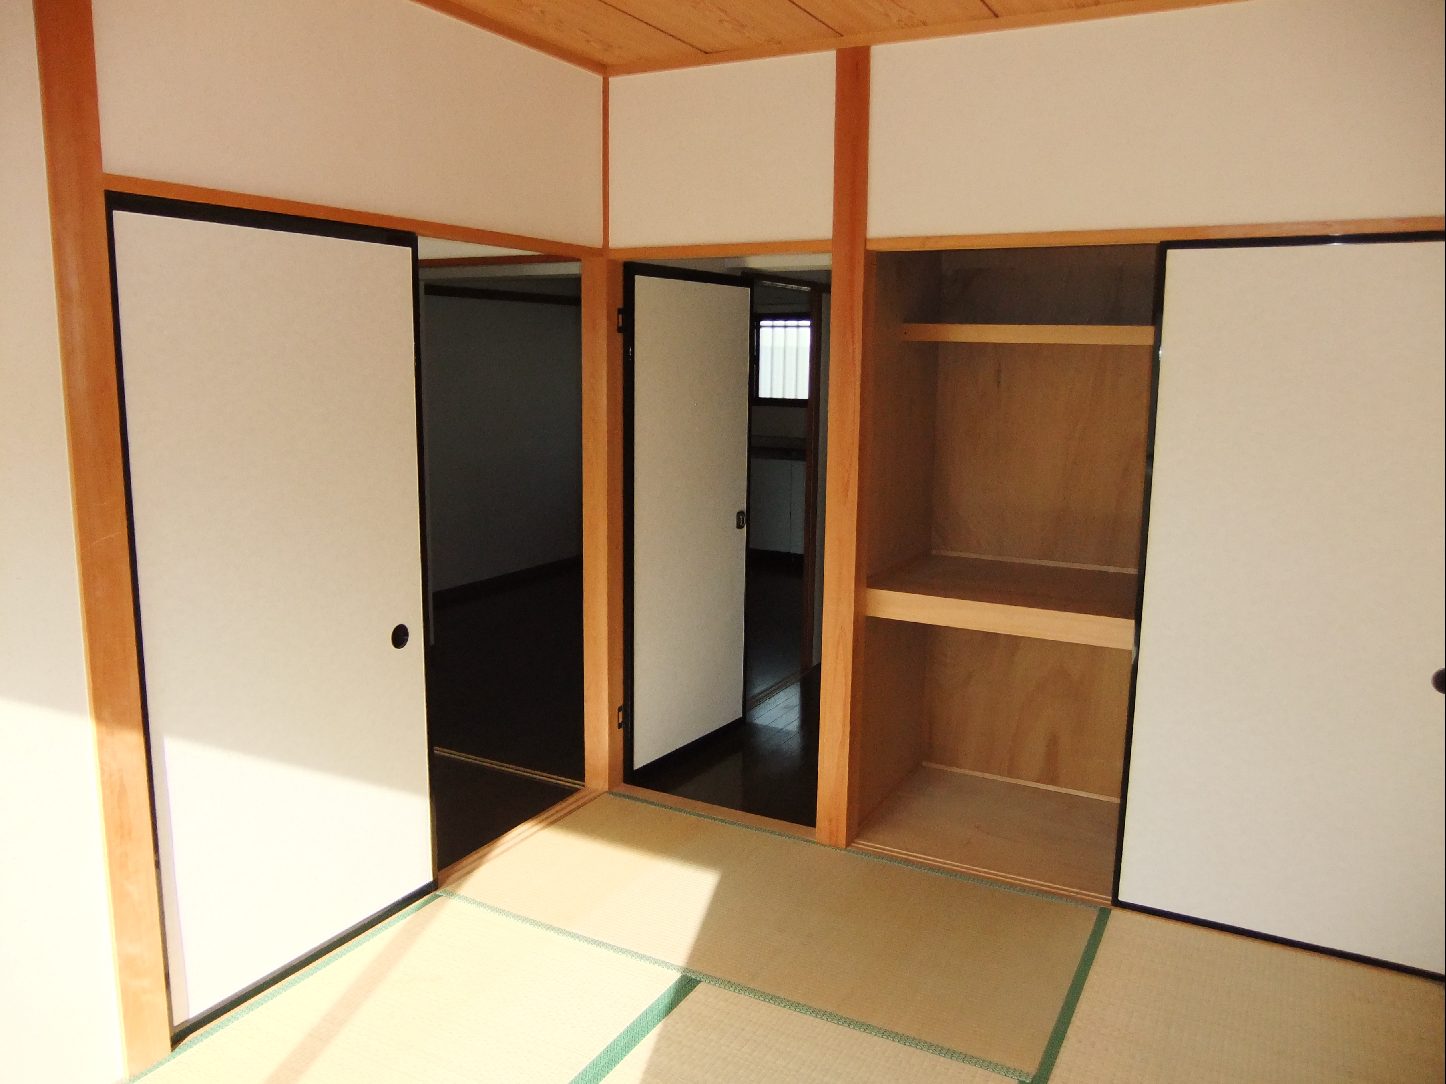 Living and room. The Japanese have a closet of between 1.